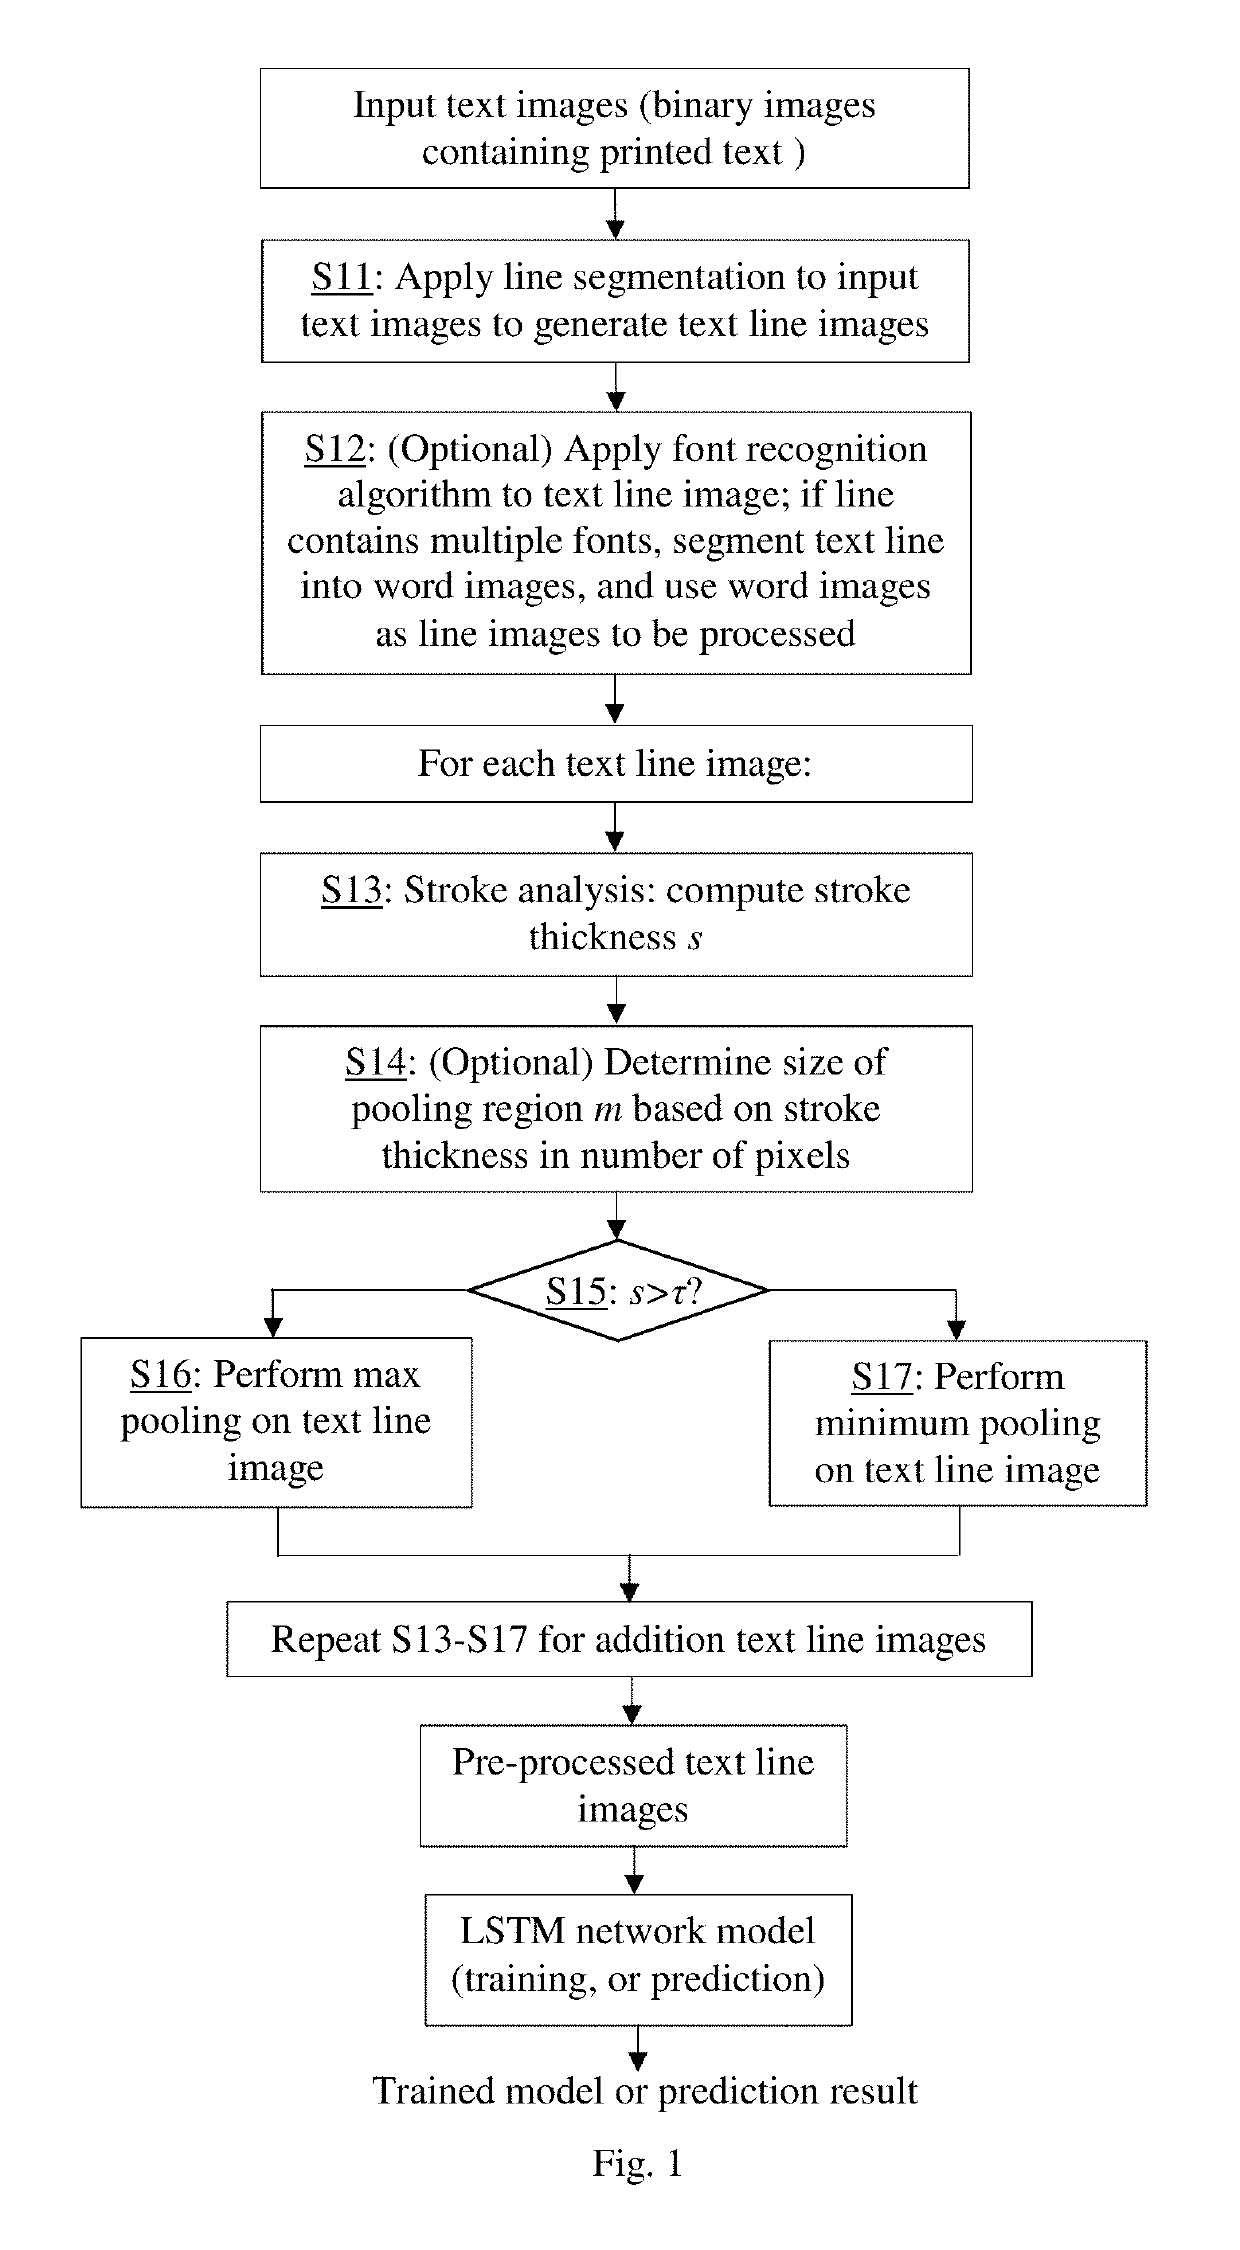 Text image processing using stroke-aware max-min pooling for OCR system employing artificial neural network